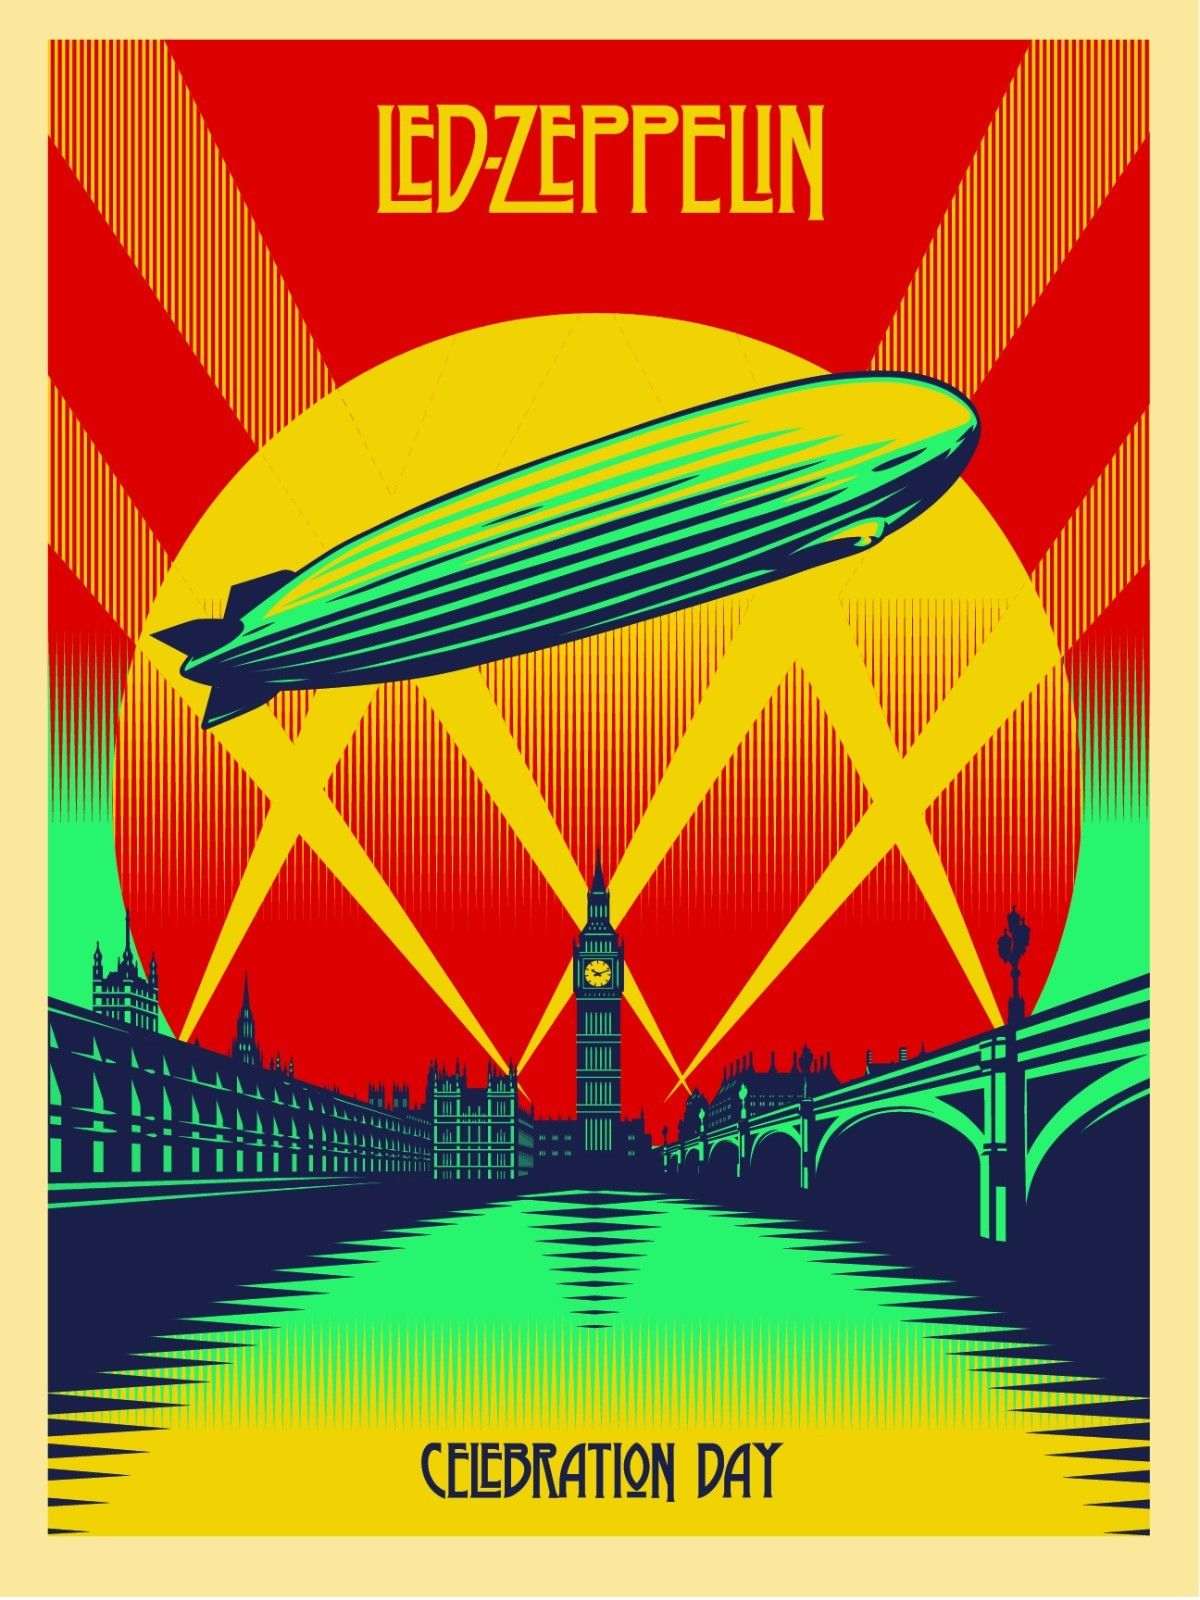 Led Zeppelin 13" X 19" Reproduction Concert Poster archival quality - Record Outlet Album and Disc Collectible Memorabilia